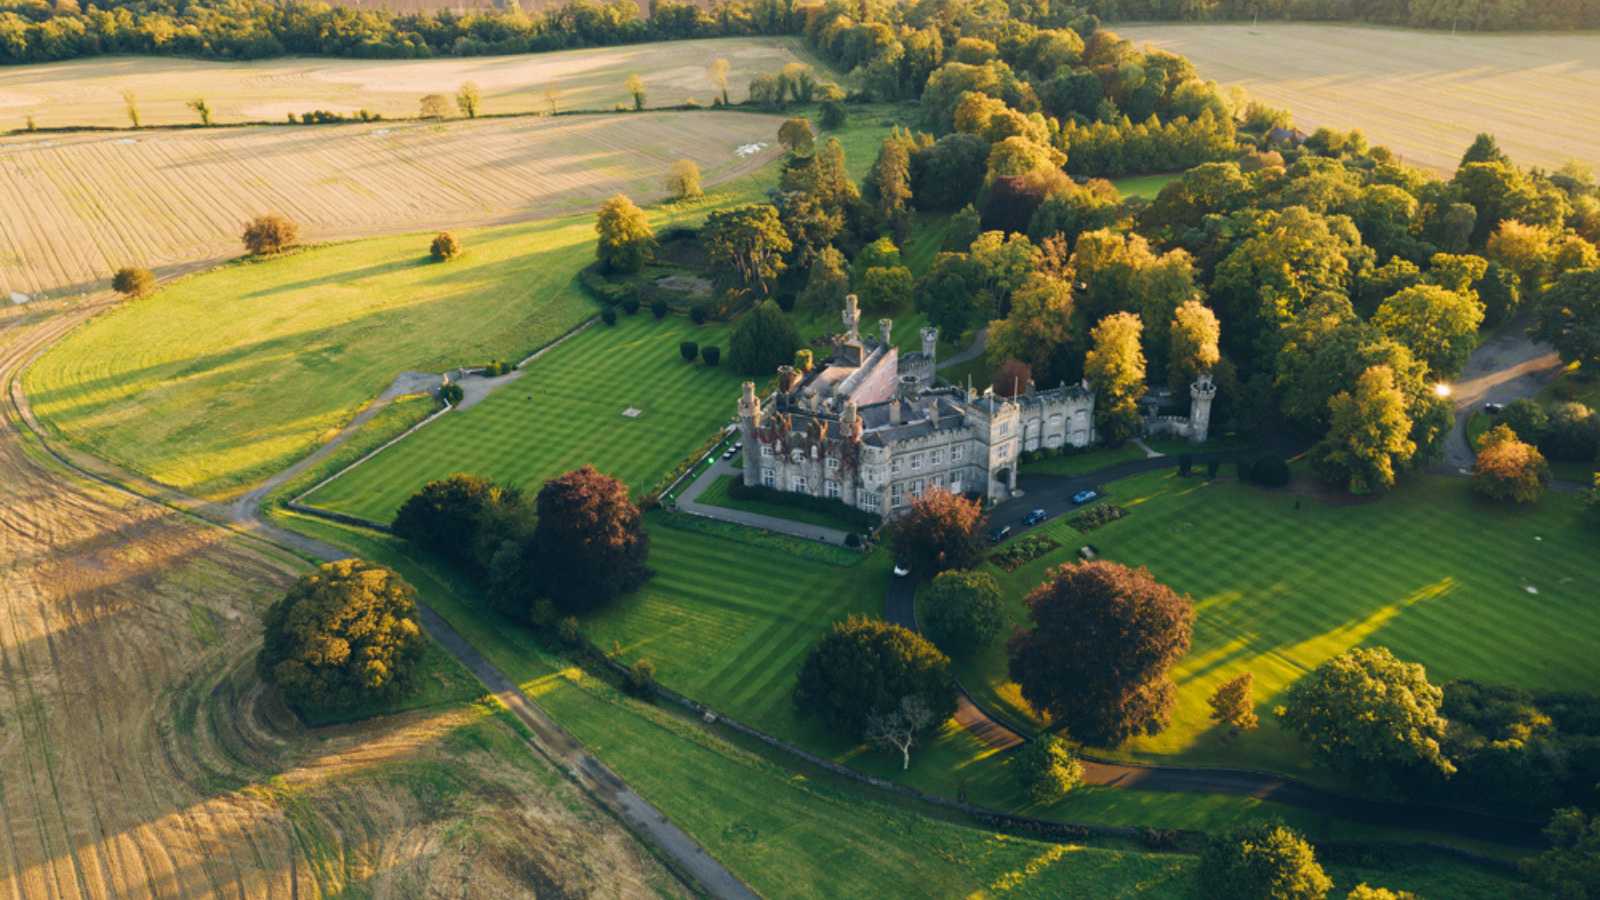 Castleknock, Dublin / Ireland - October 2020 : Aerial view of Luttrellstown Castle Resort, luxurious 5-star hotel and wedding venue in 15th-century castle offered for hire